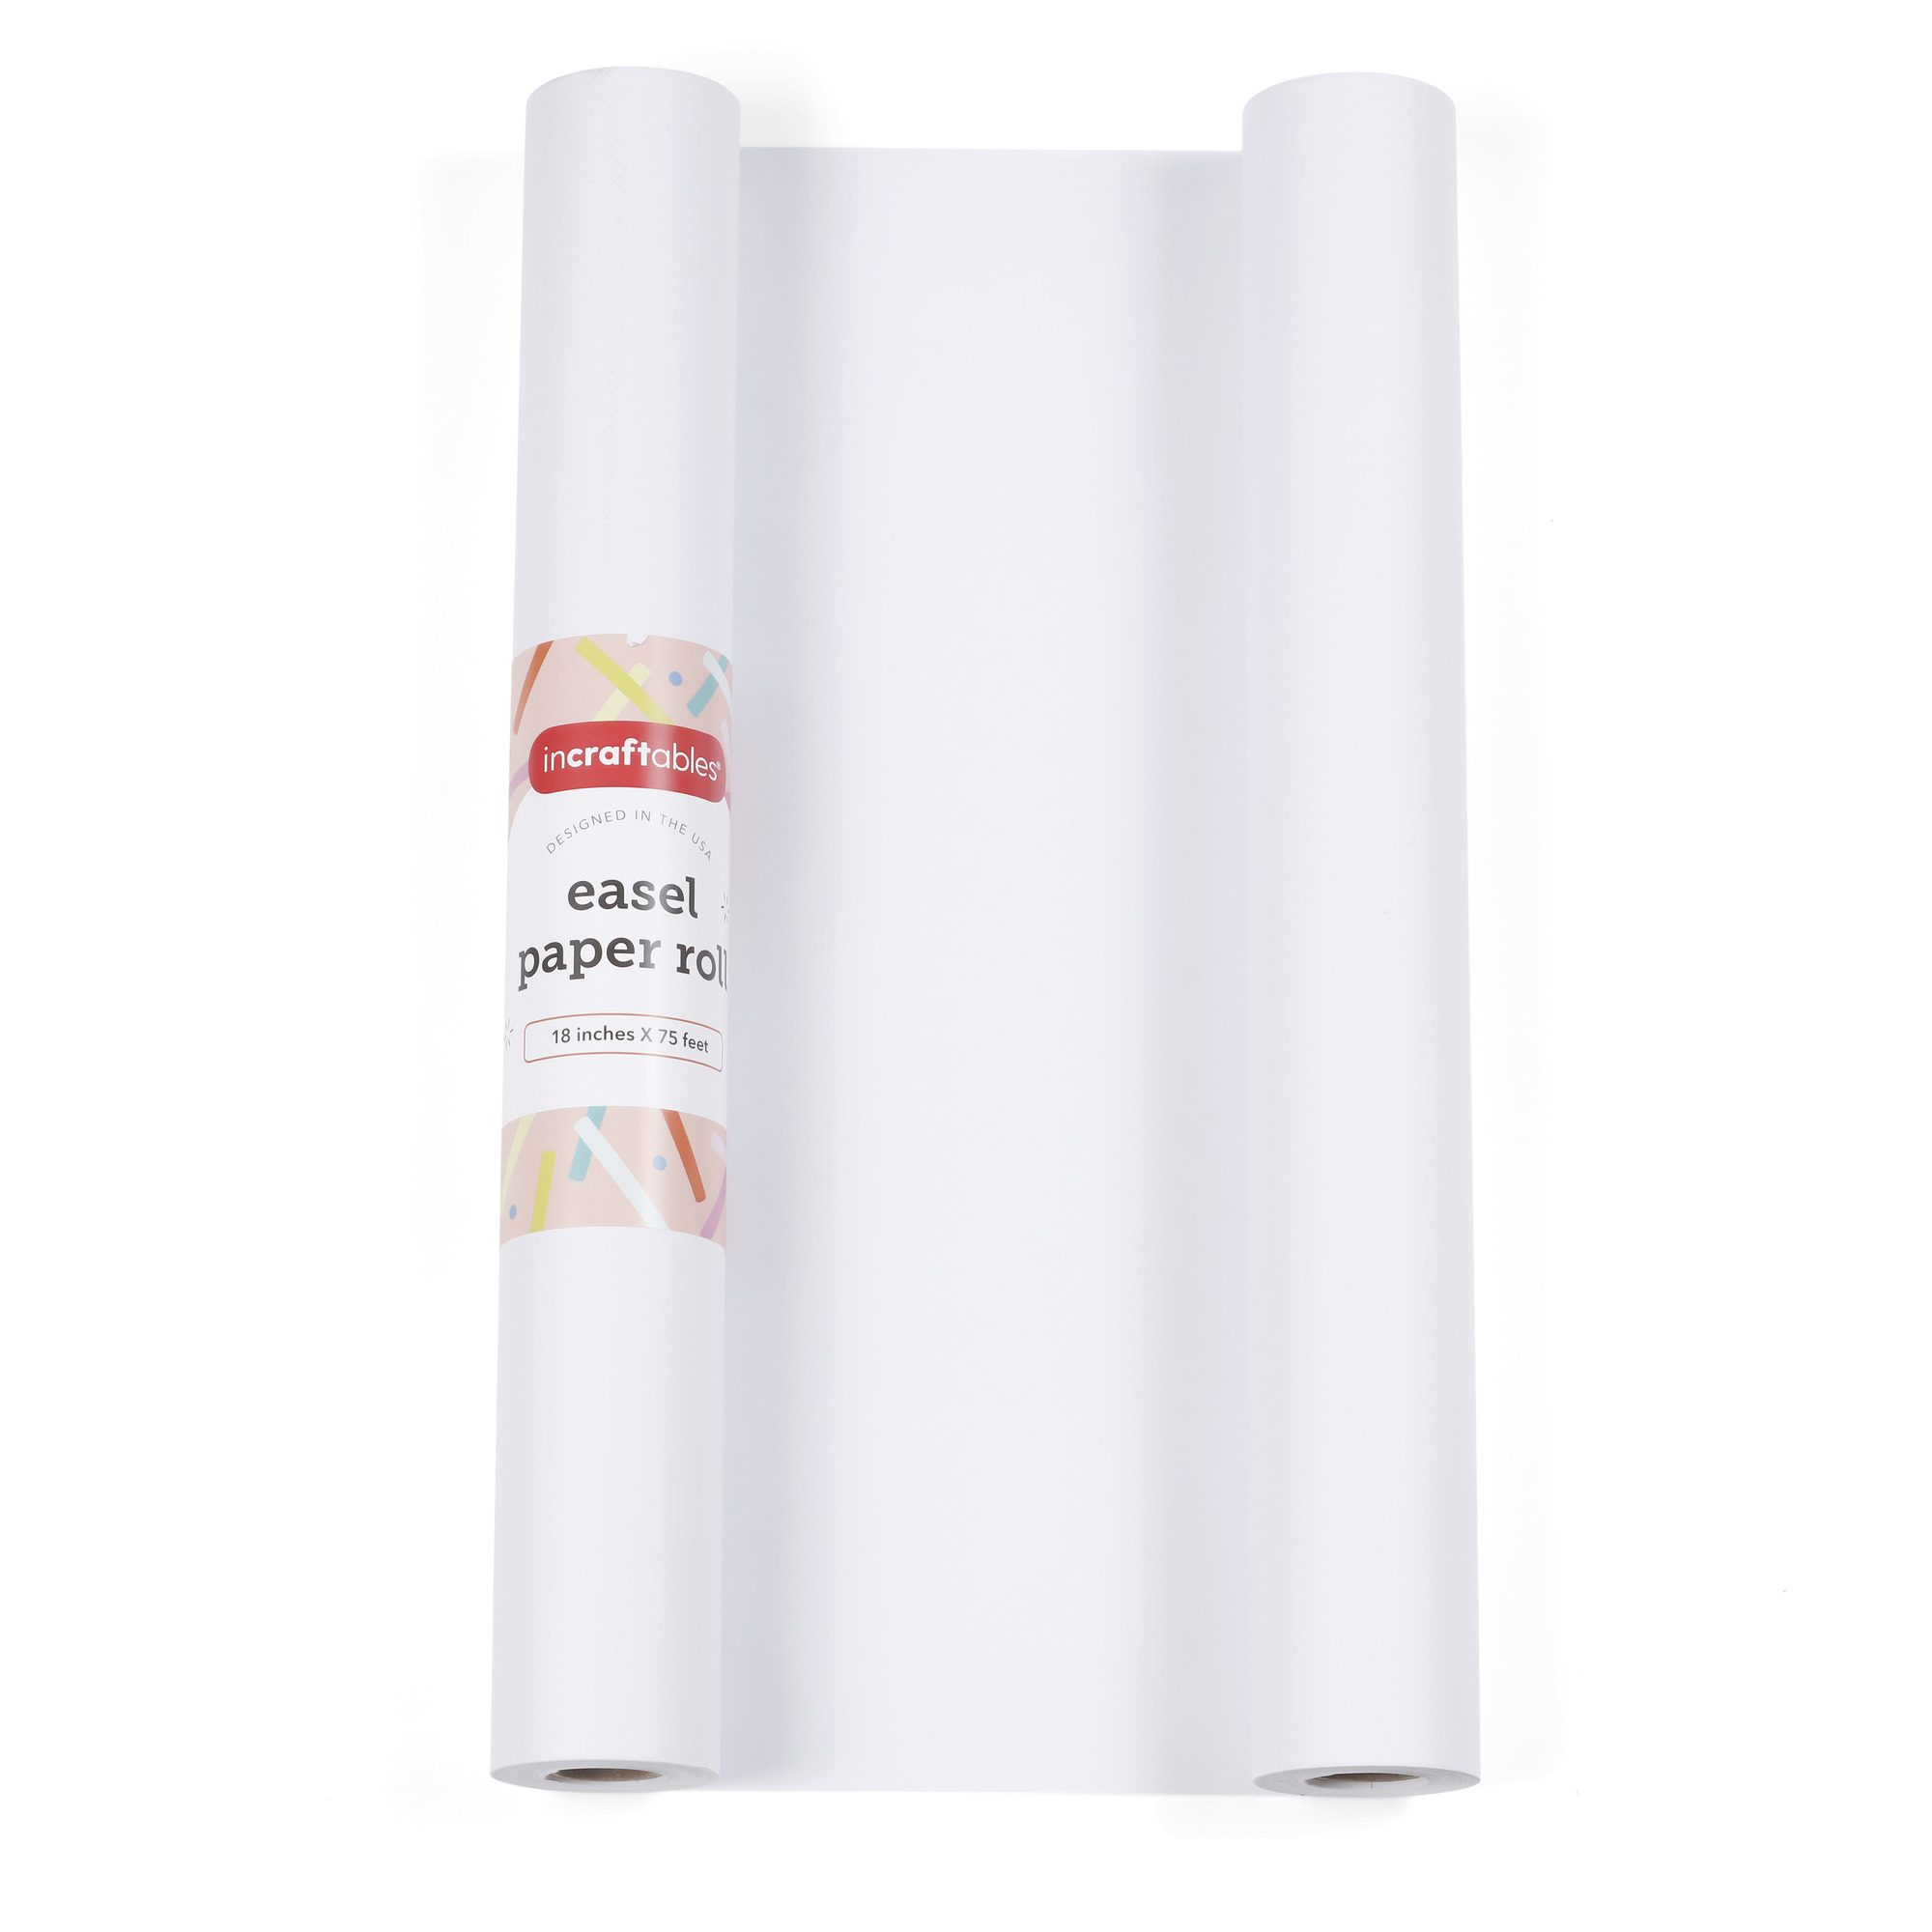 Easel Paper Roll